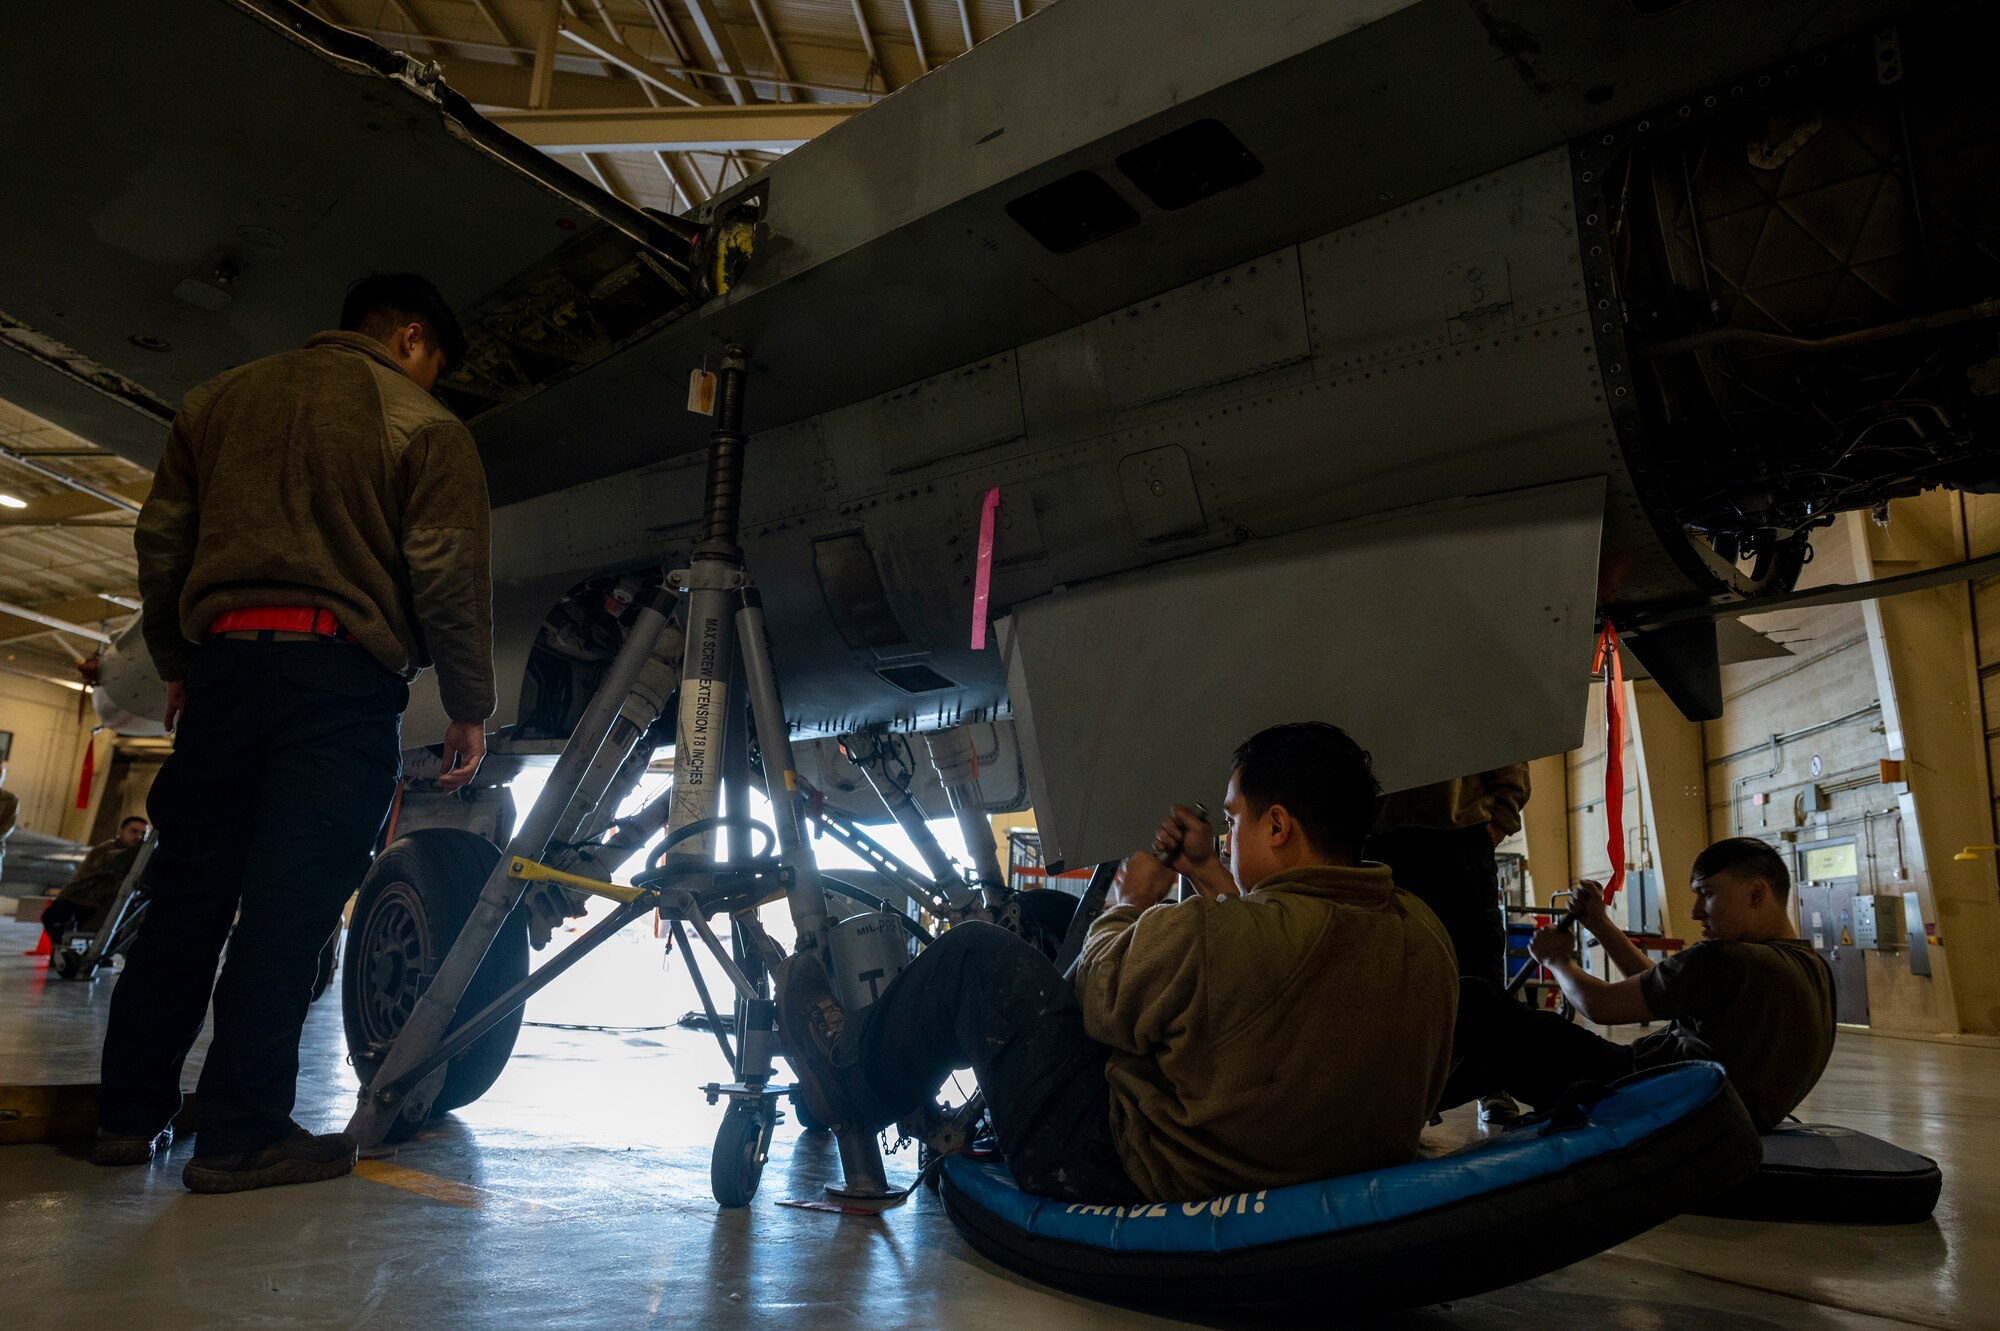 Airmen from the 49th Equipment Maintenance Squadron phase section use jacks to lift up an F-16 Viper for an inspection at Holloman Air Force Base, New Mexico, Dec. 1, 2023. The 49th EMS phase section inspects all aspects of an F-16, from exterior to interior, in order to check for any damage or infractions that would jeopardize the aircrafts stability in the sky. (U.S. Air Force photo by Airman 1st Class Isaiah Pedrazzini)